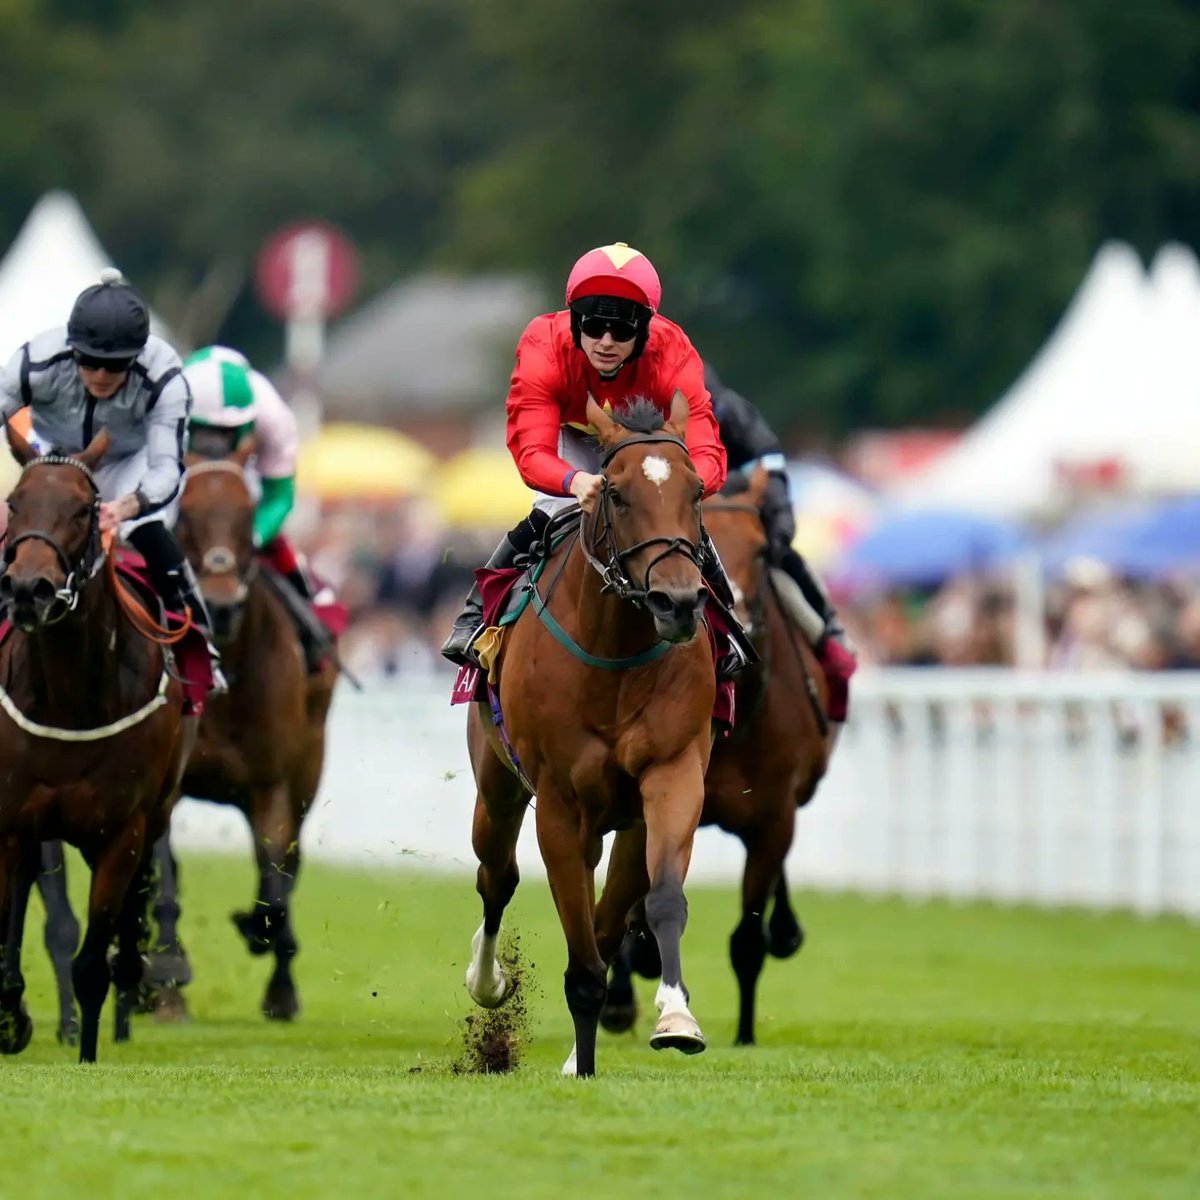 Rest in peace Highfield Princess 💔 Heartbreaking news breaking this morning that this star mare, a winner of the King George Qatar Stakes at Goodwood, has passed away following an injury. Thoughts with all the team at John Quinn Racing. #QGF #GloriousGoodwood